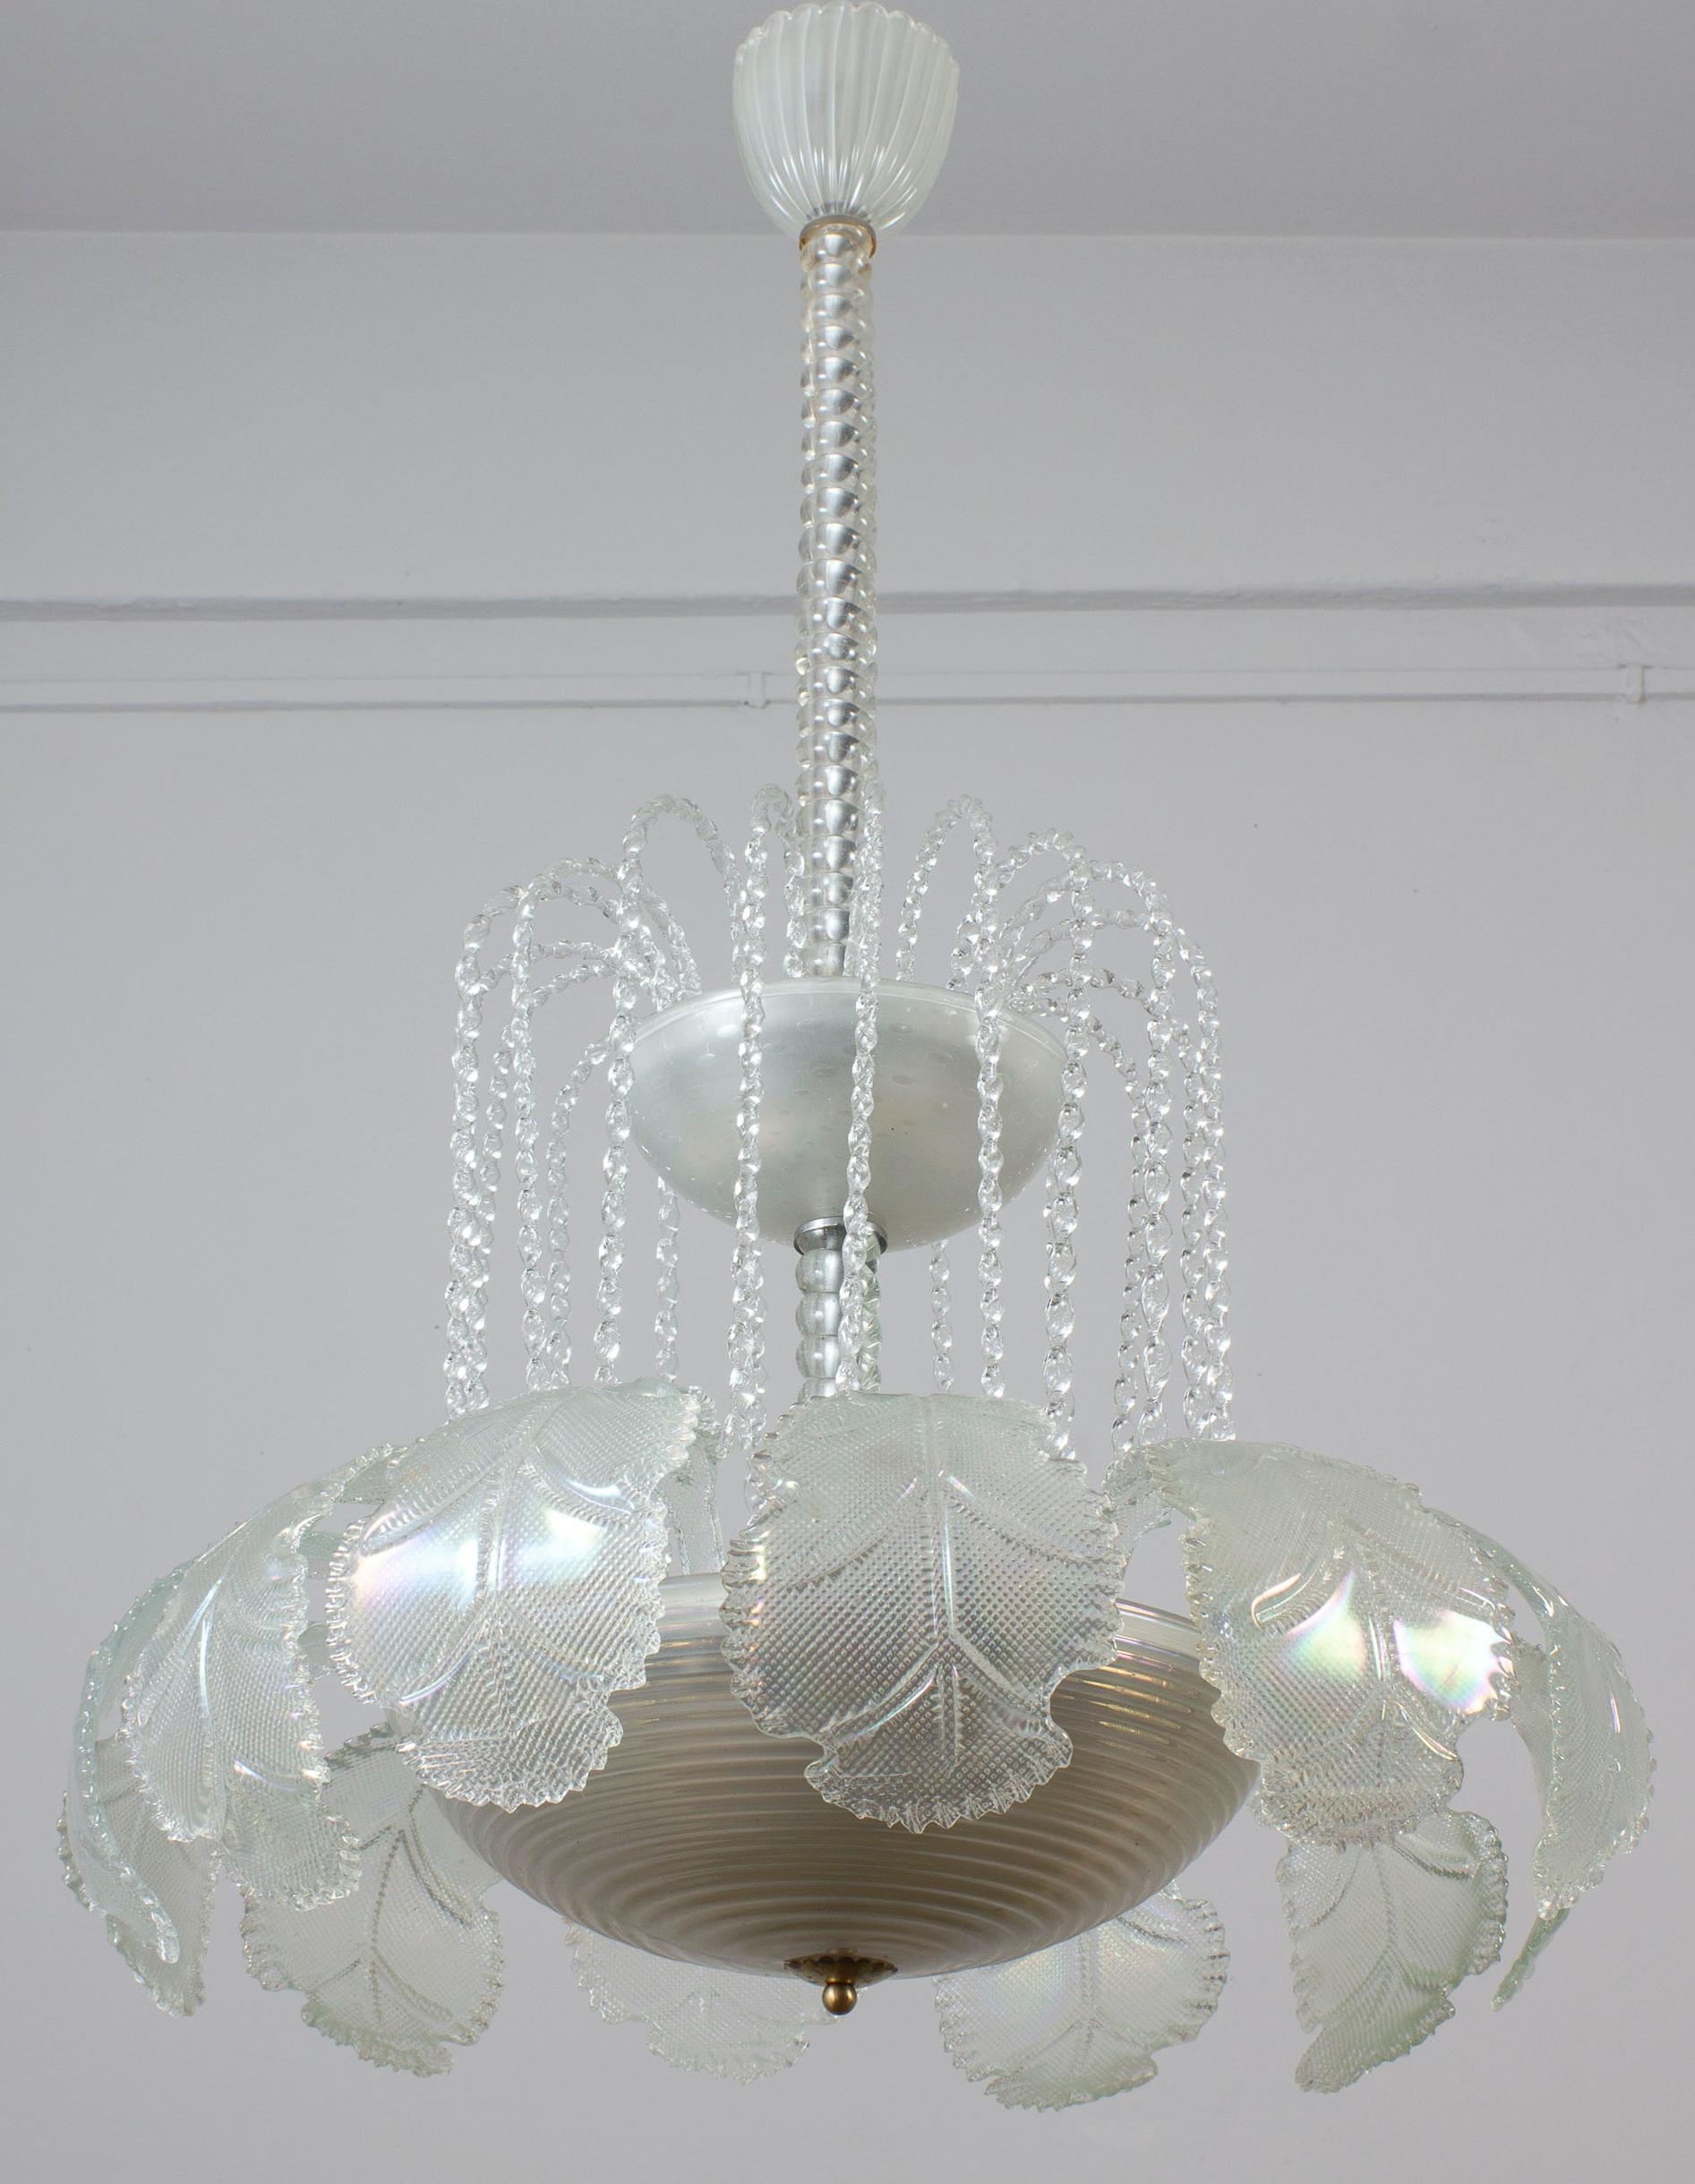 Superb Art Deco Ninfea Murano Glass Chandelier by Barovier Italy, 1940 For Sale 7